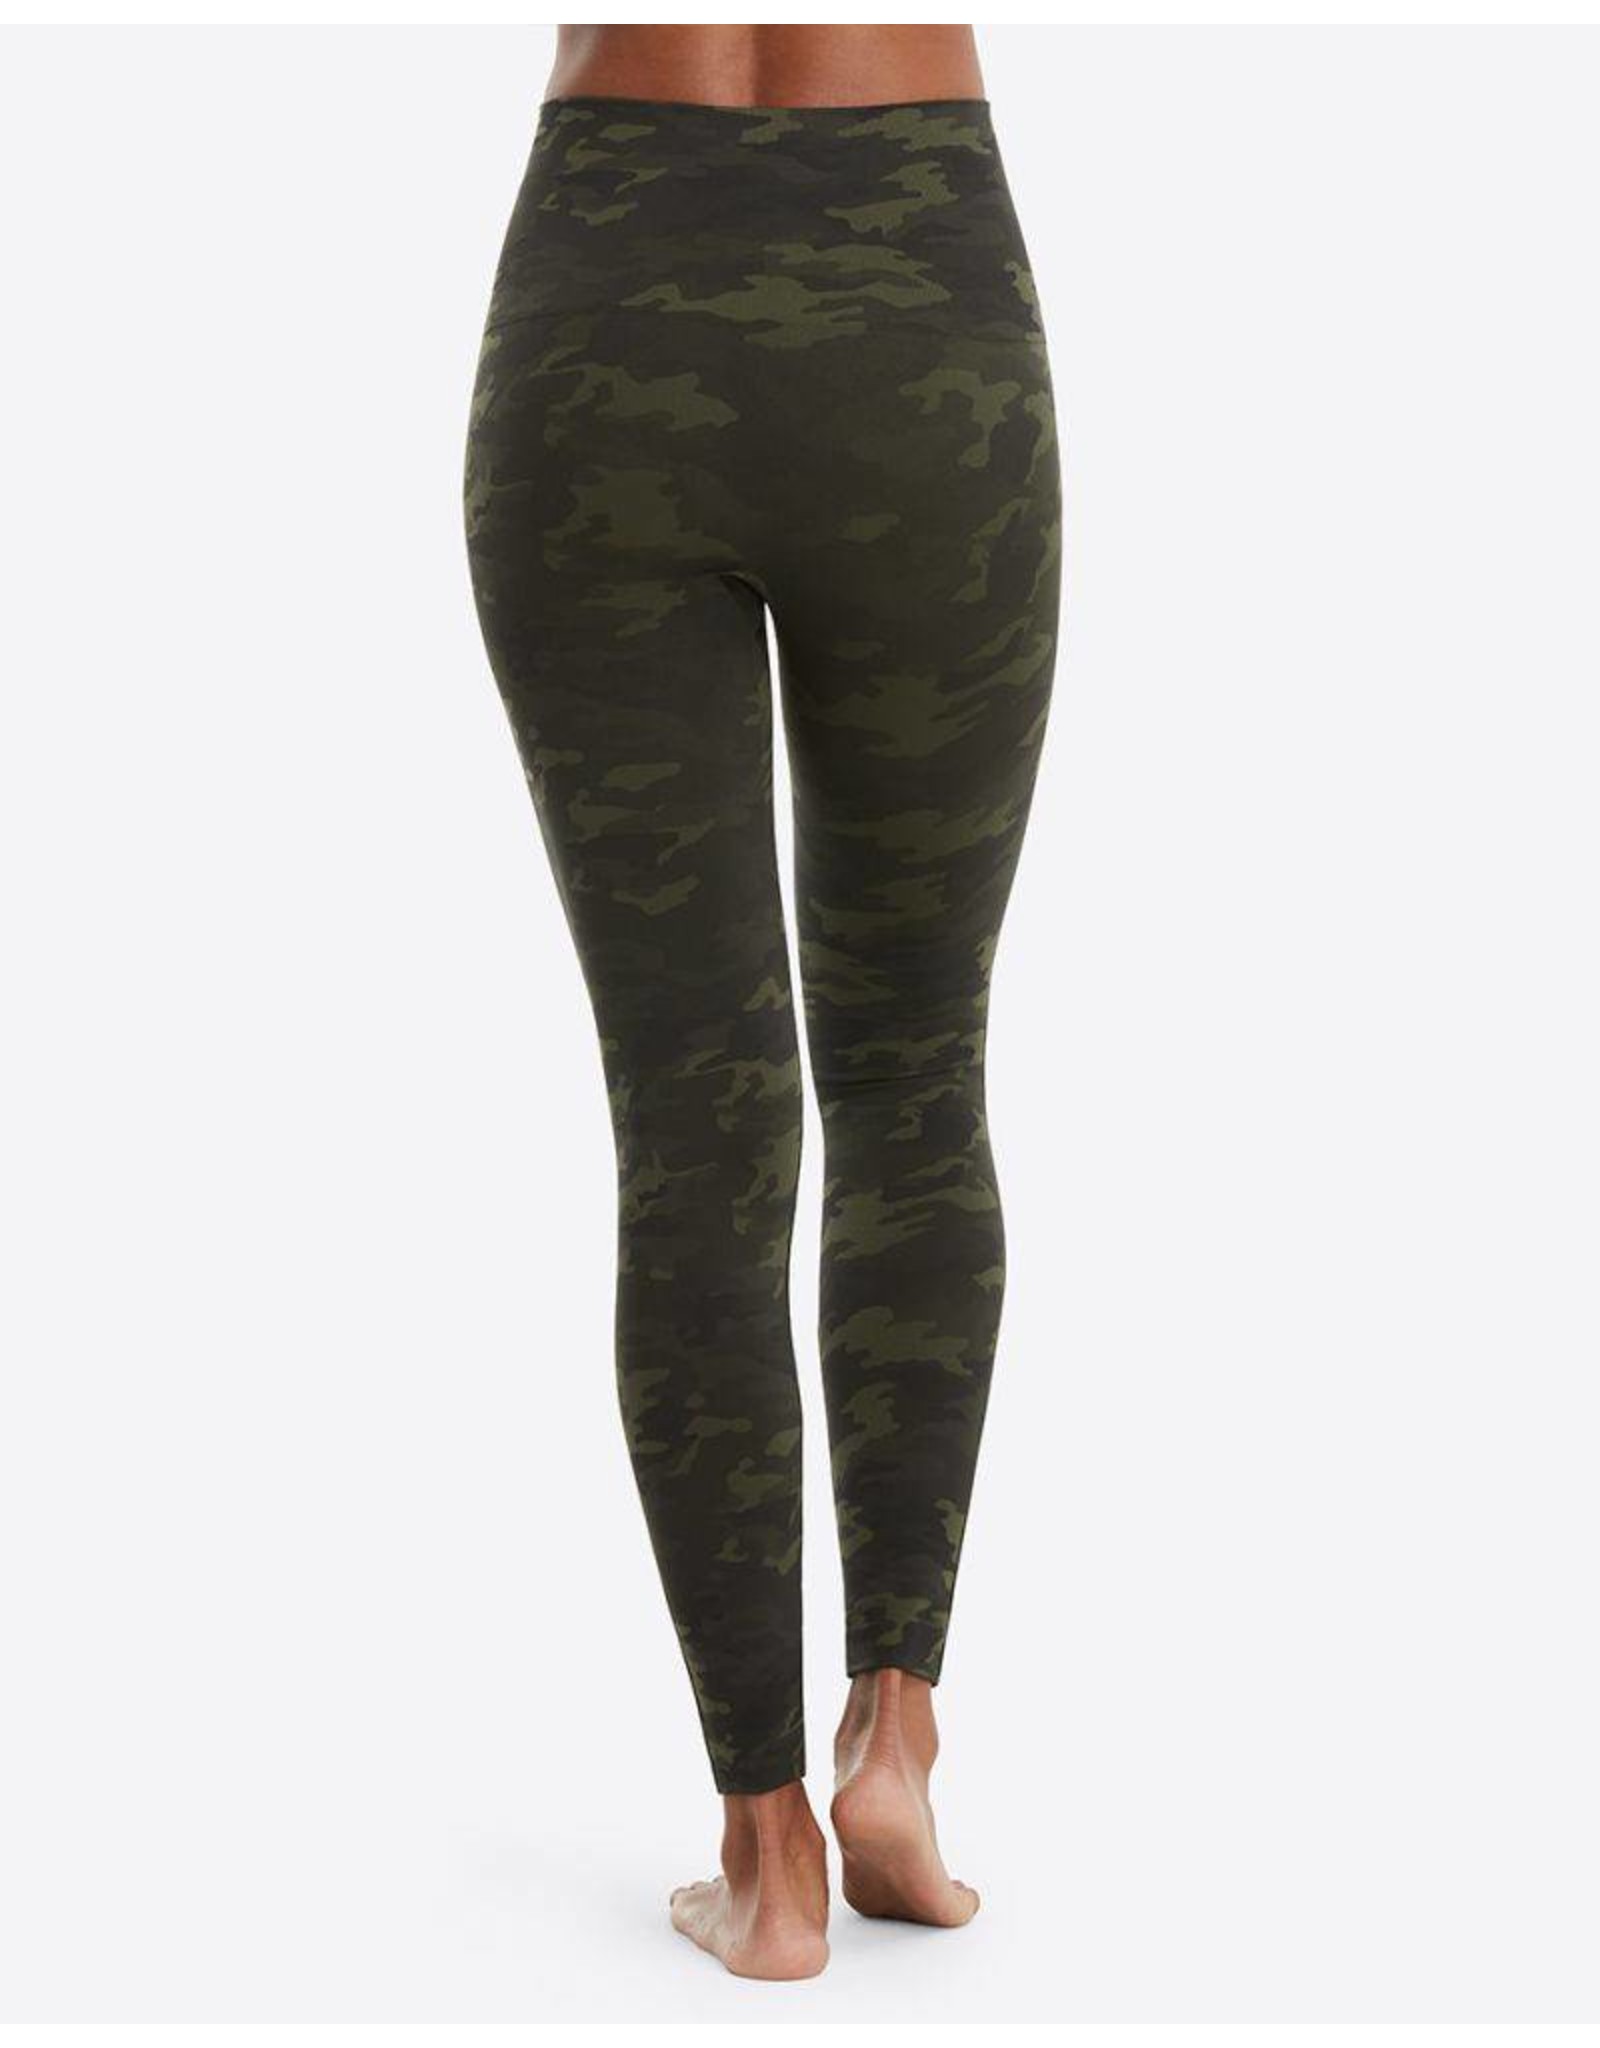 Spanx Look At Me Now Leggings Green Camo